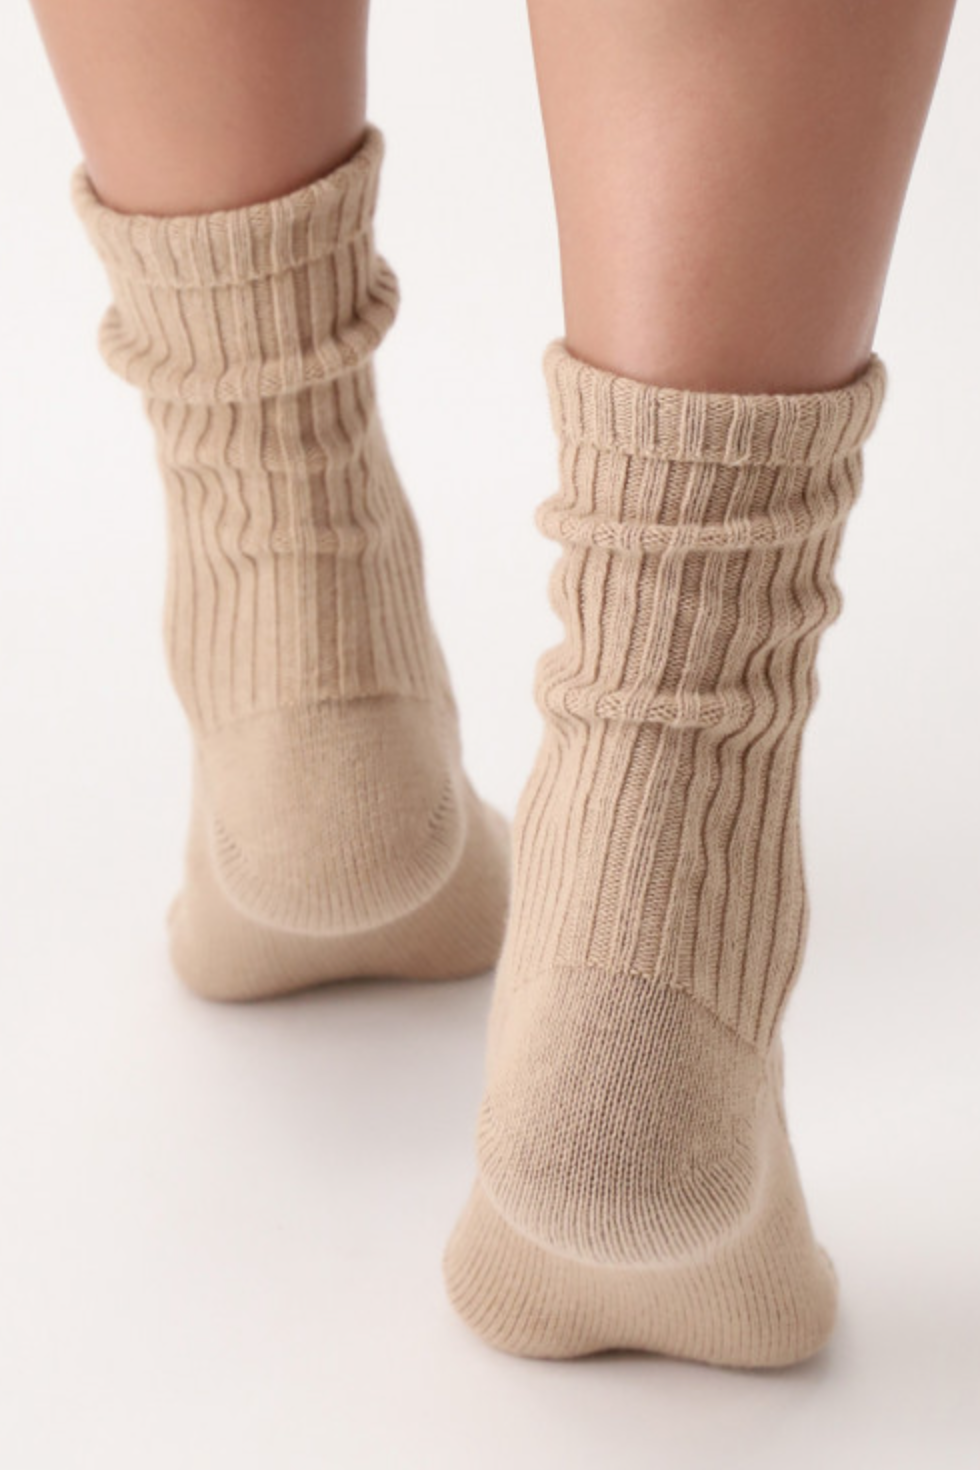 OroblÌ_ All Colors Bootie Sock - Beige soft ribbed knitted cotton ankle socks with plain sole, shaped heel and turn down cuff.